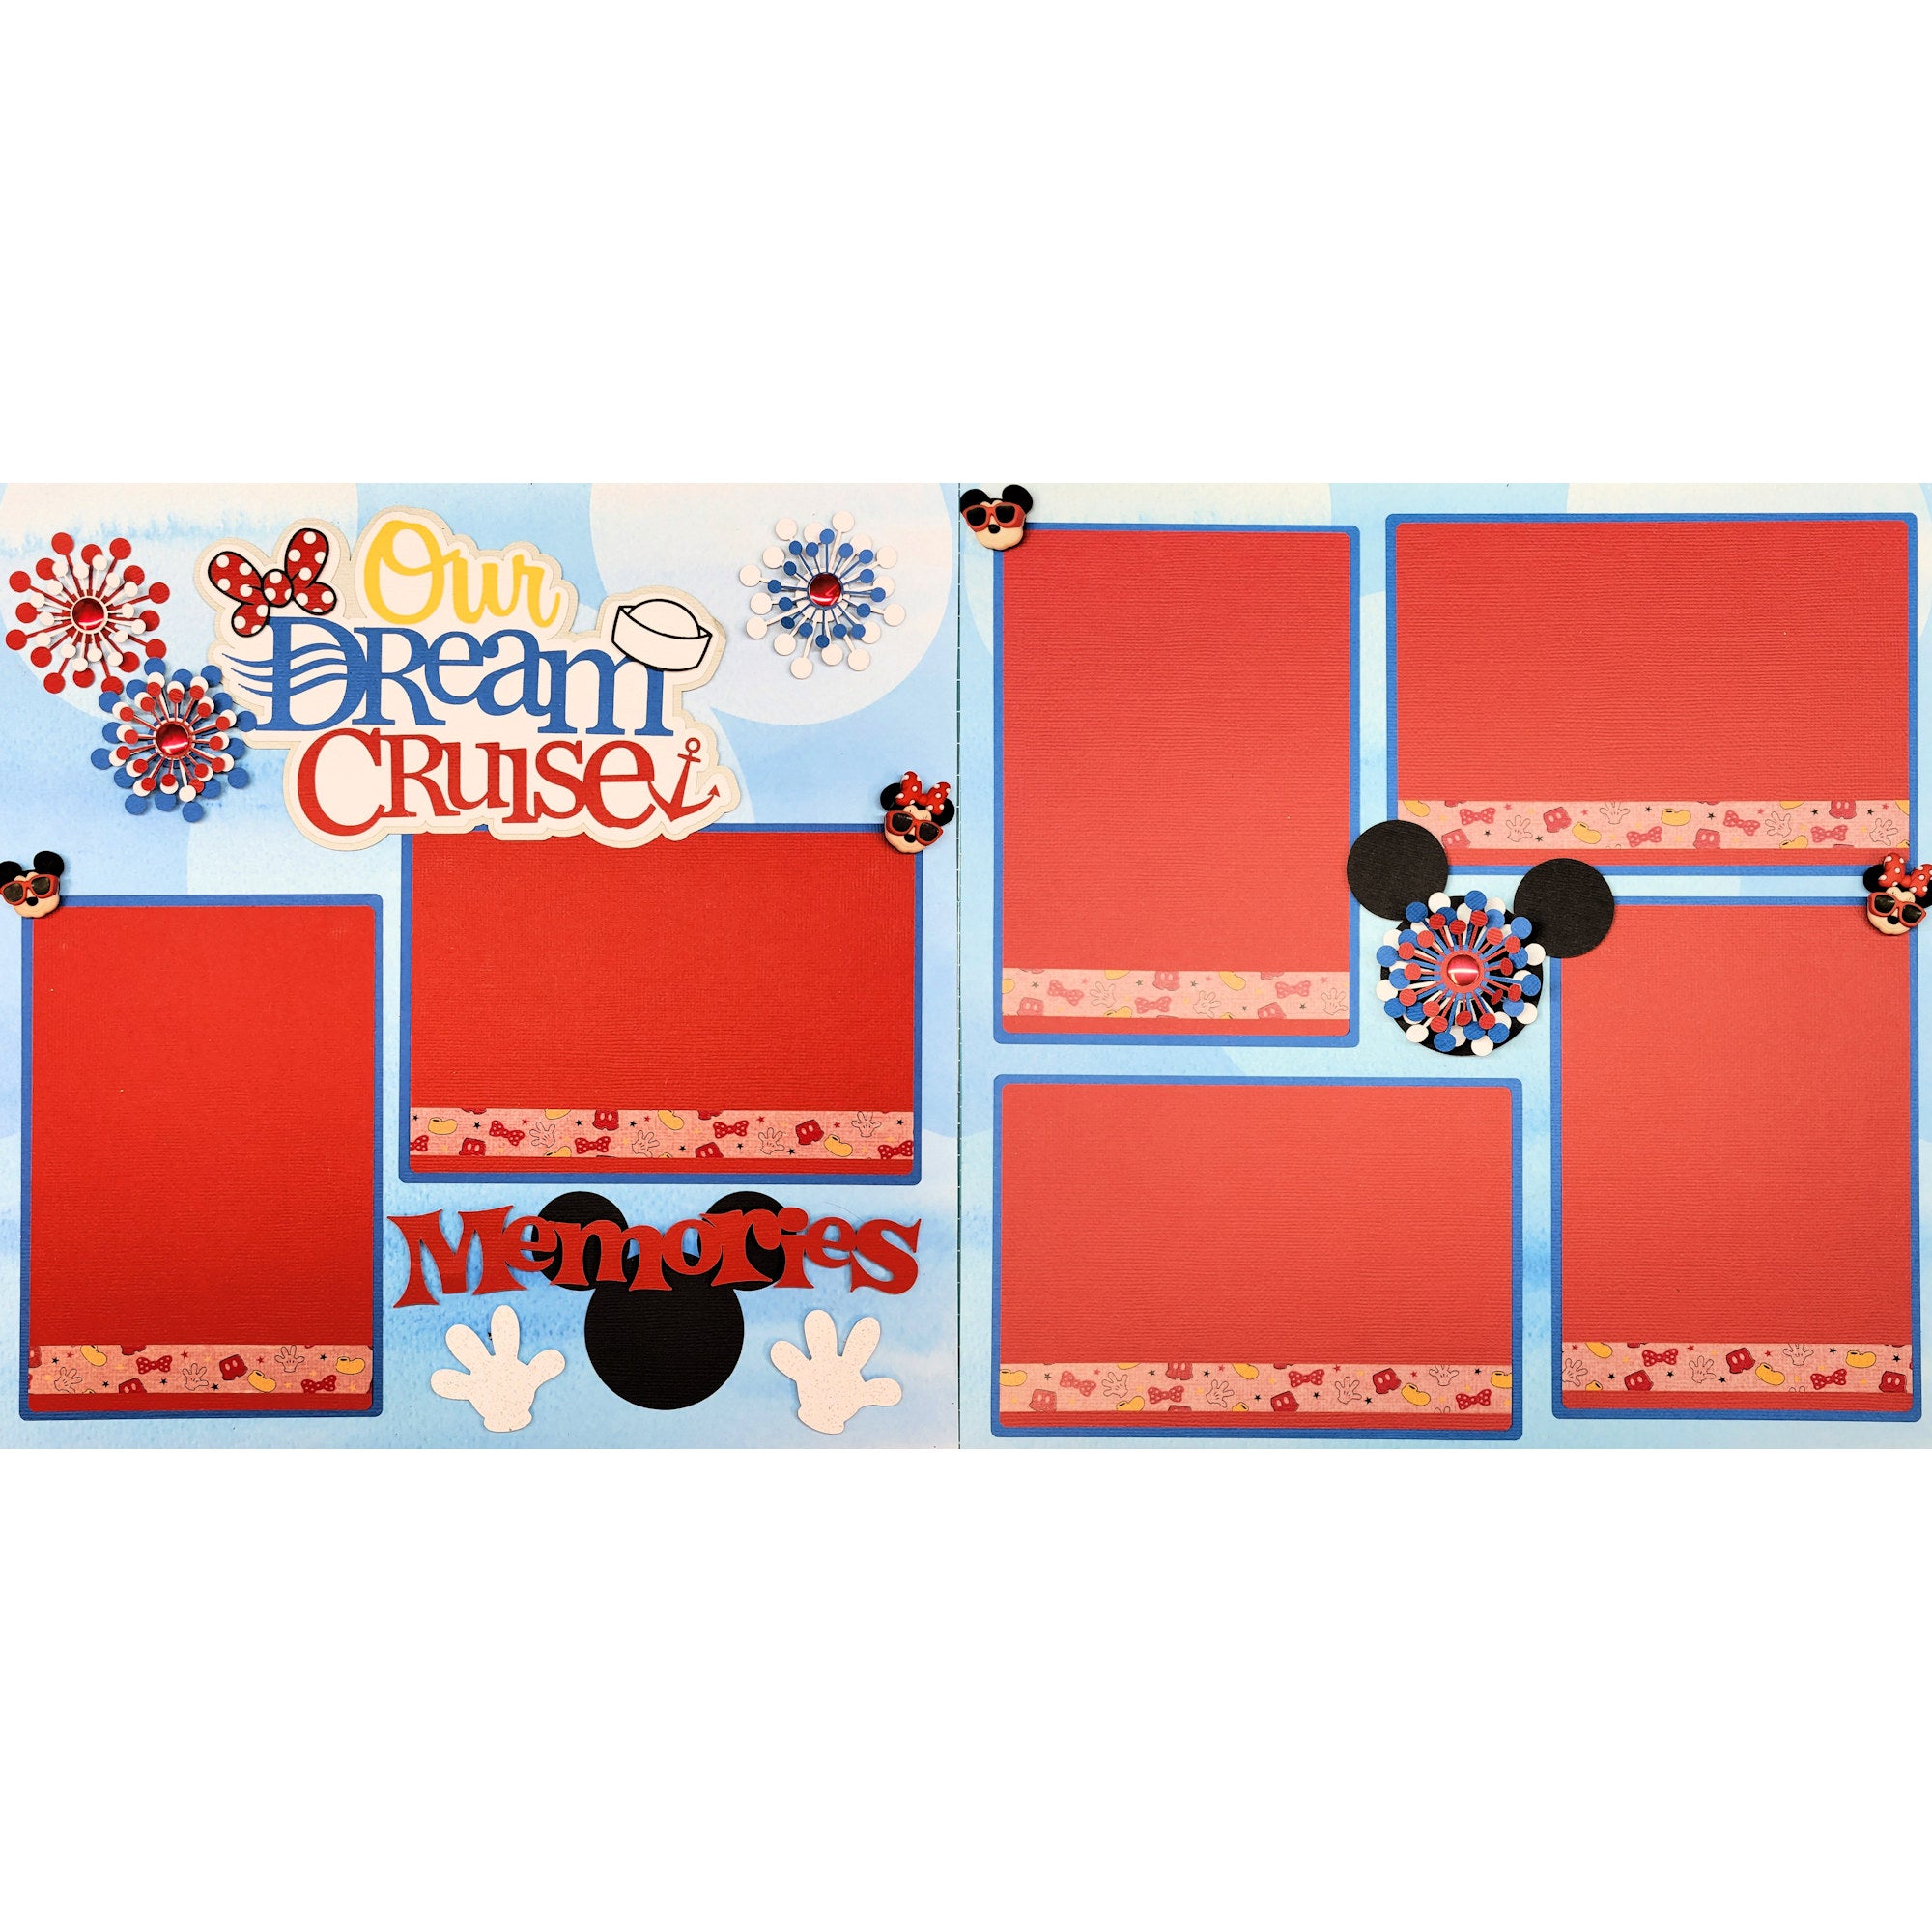 Disneyana Collection Our Dream Cruise Fully-Assembled, Handmade 2 - 12 x 12 Page Scrapbook Premade by SSC Designs